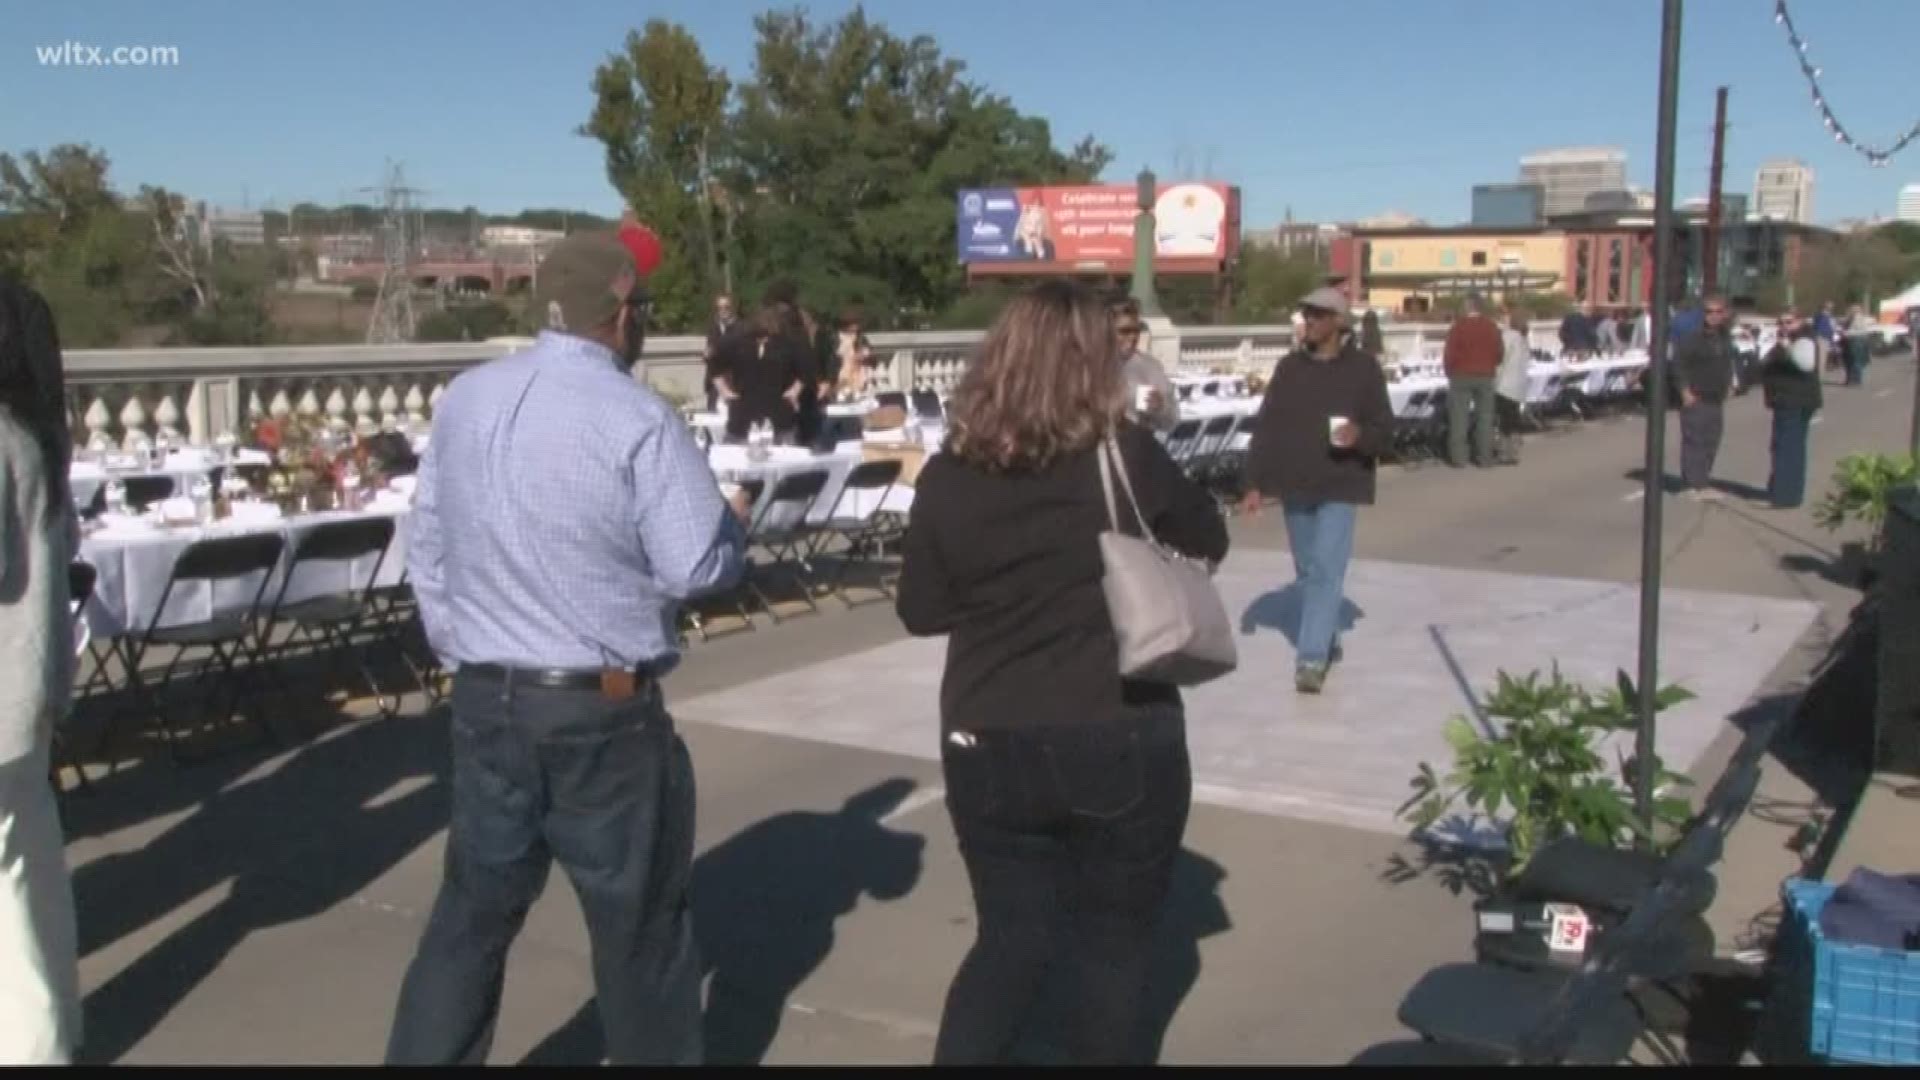 The 4th Annual Gervais Street Bridge Dinner was held on Sunday.  News19's Kayland Hagwood reports.